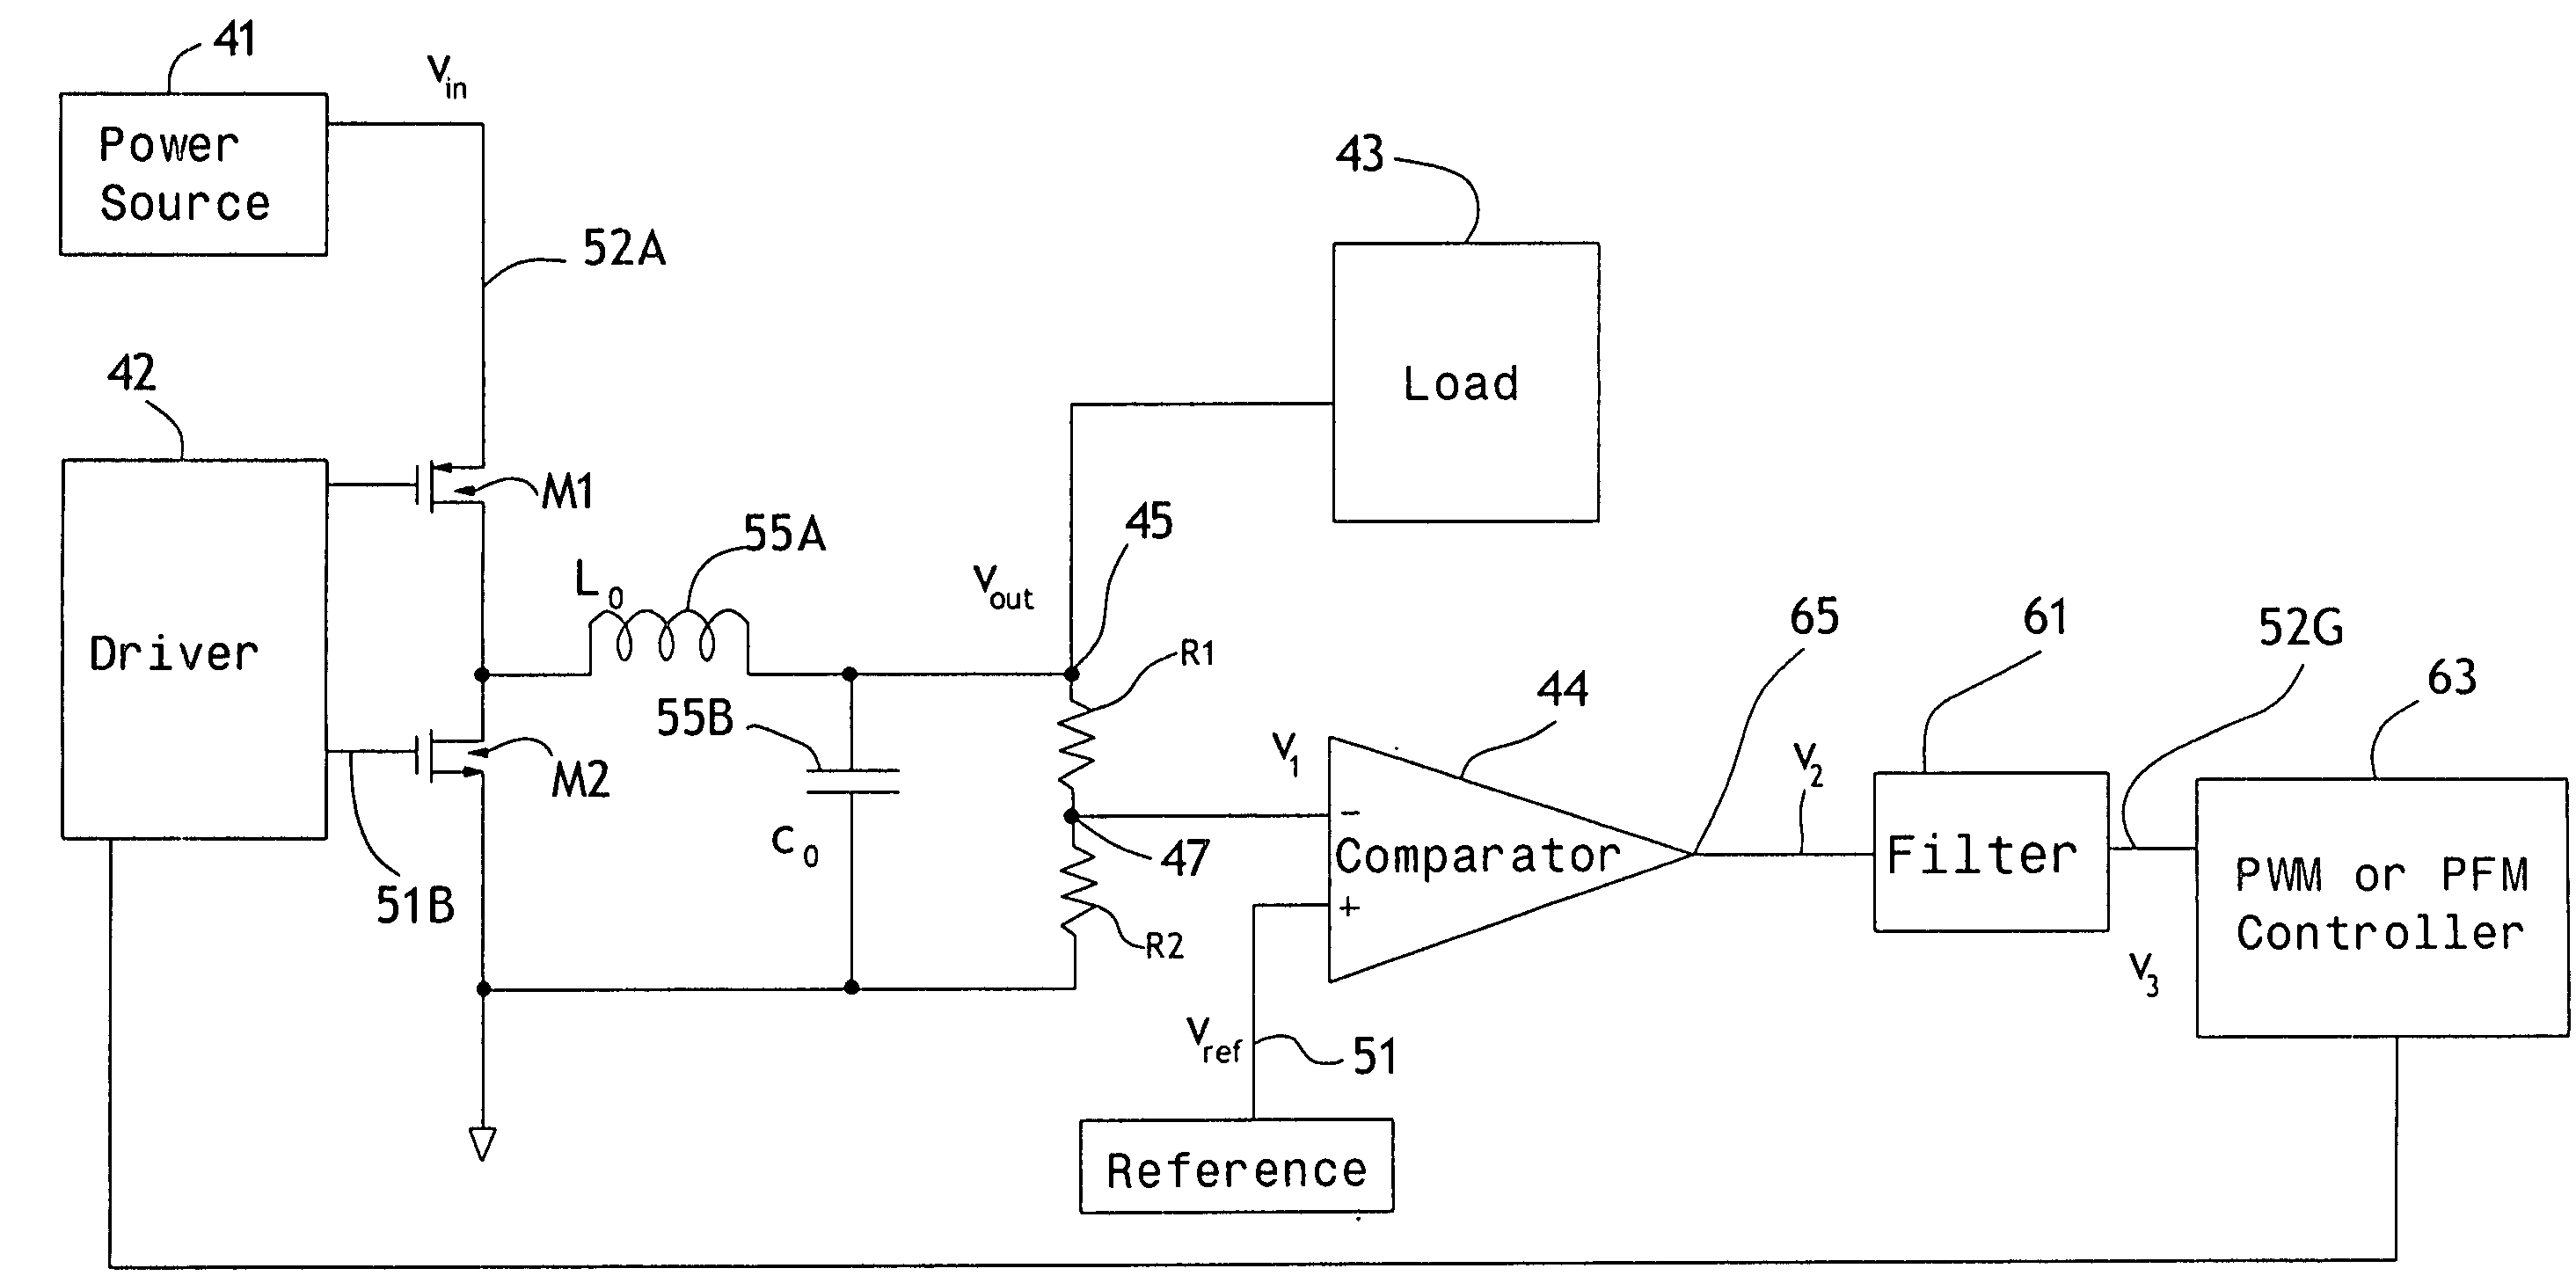 Control loop for switching power converters